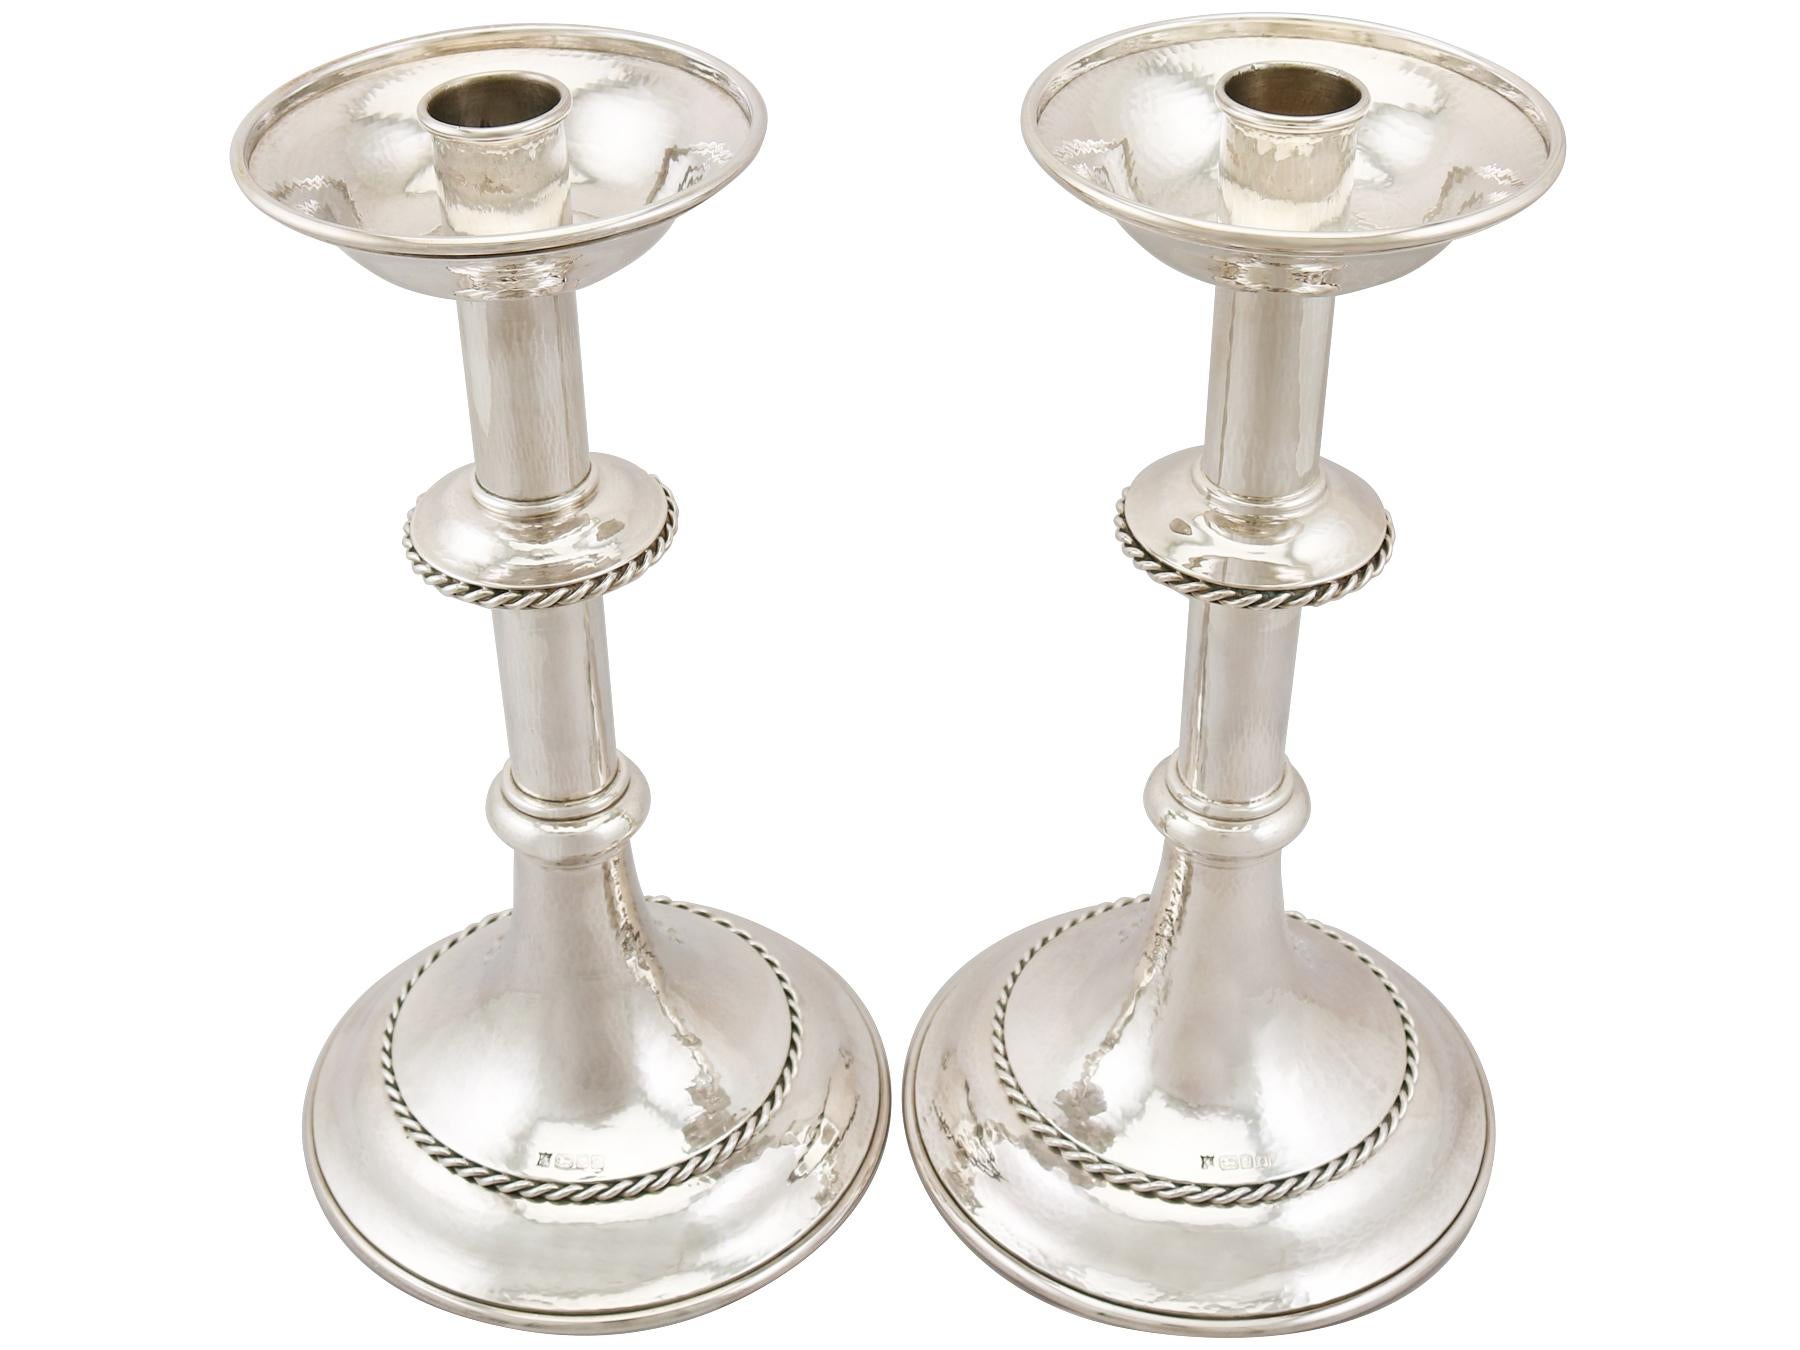 An exceptional, fine and impressive pair of large vintage George VI English sterling silver alter candlesticks in the Arts & Crafts style; part of our ornamental silverware collection.

These exceptional vintage George VI sterling silver alter